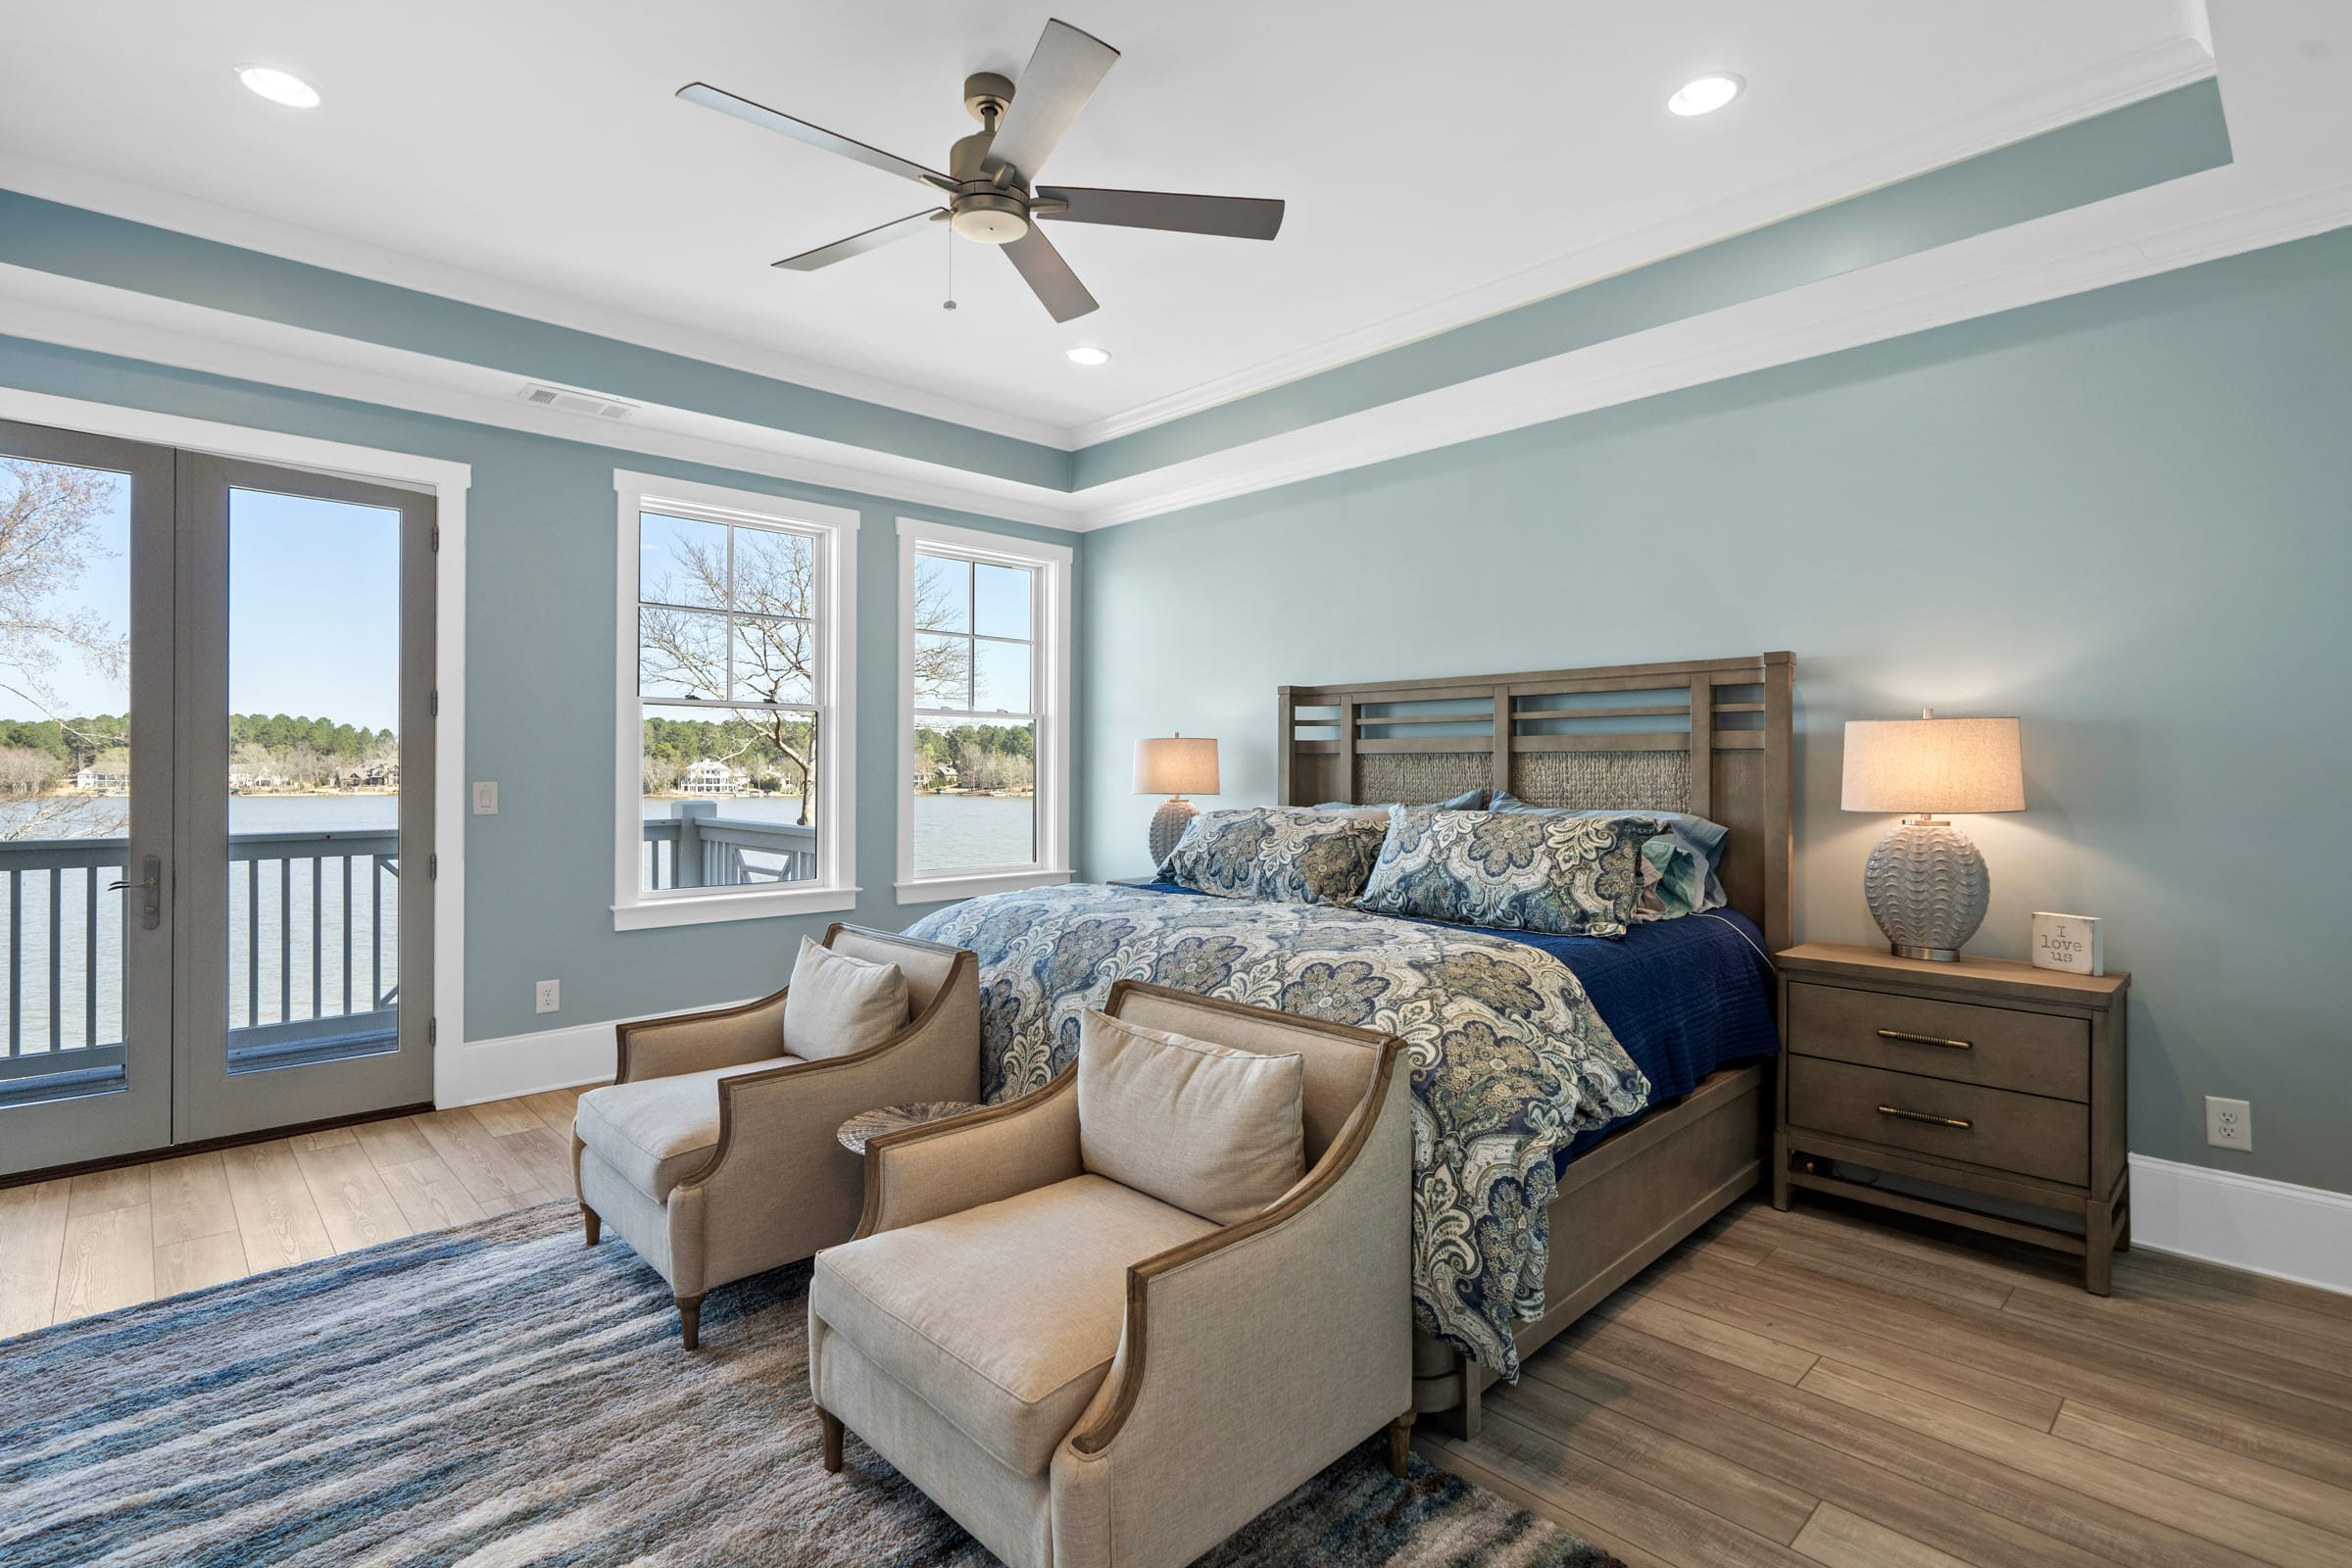 Stunning Soft Blue Primary Bedroom with Two Door Balcony Exit |PAXISgroup